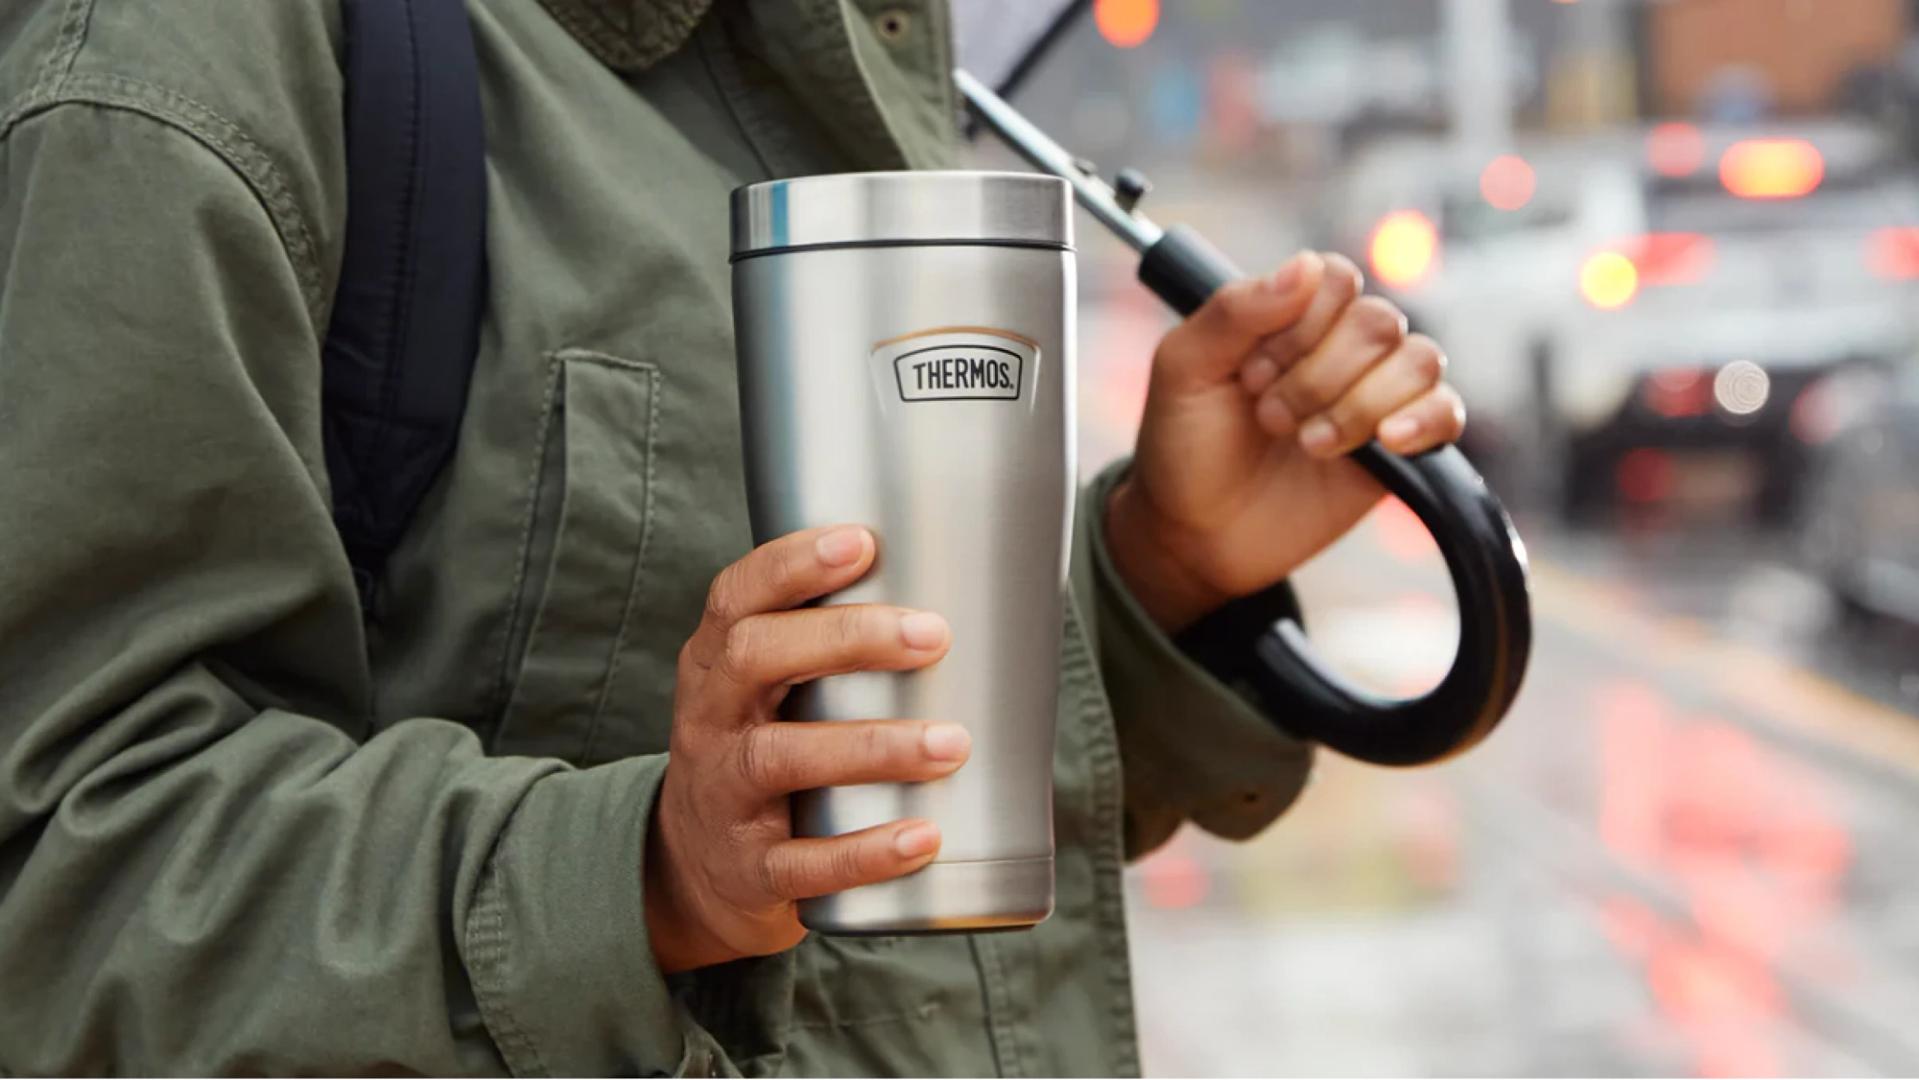 Man with Thermos tumbler